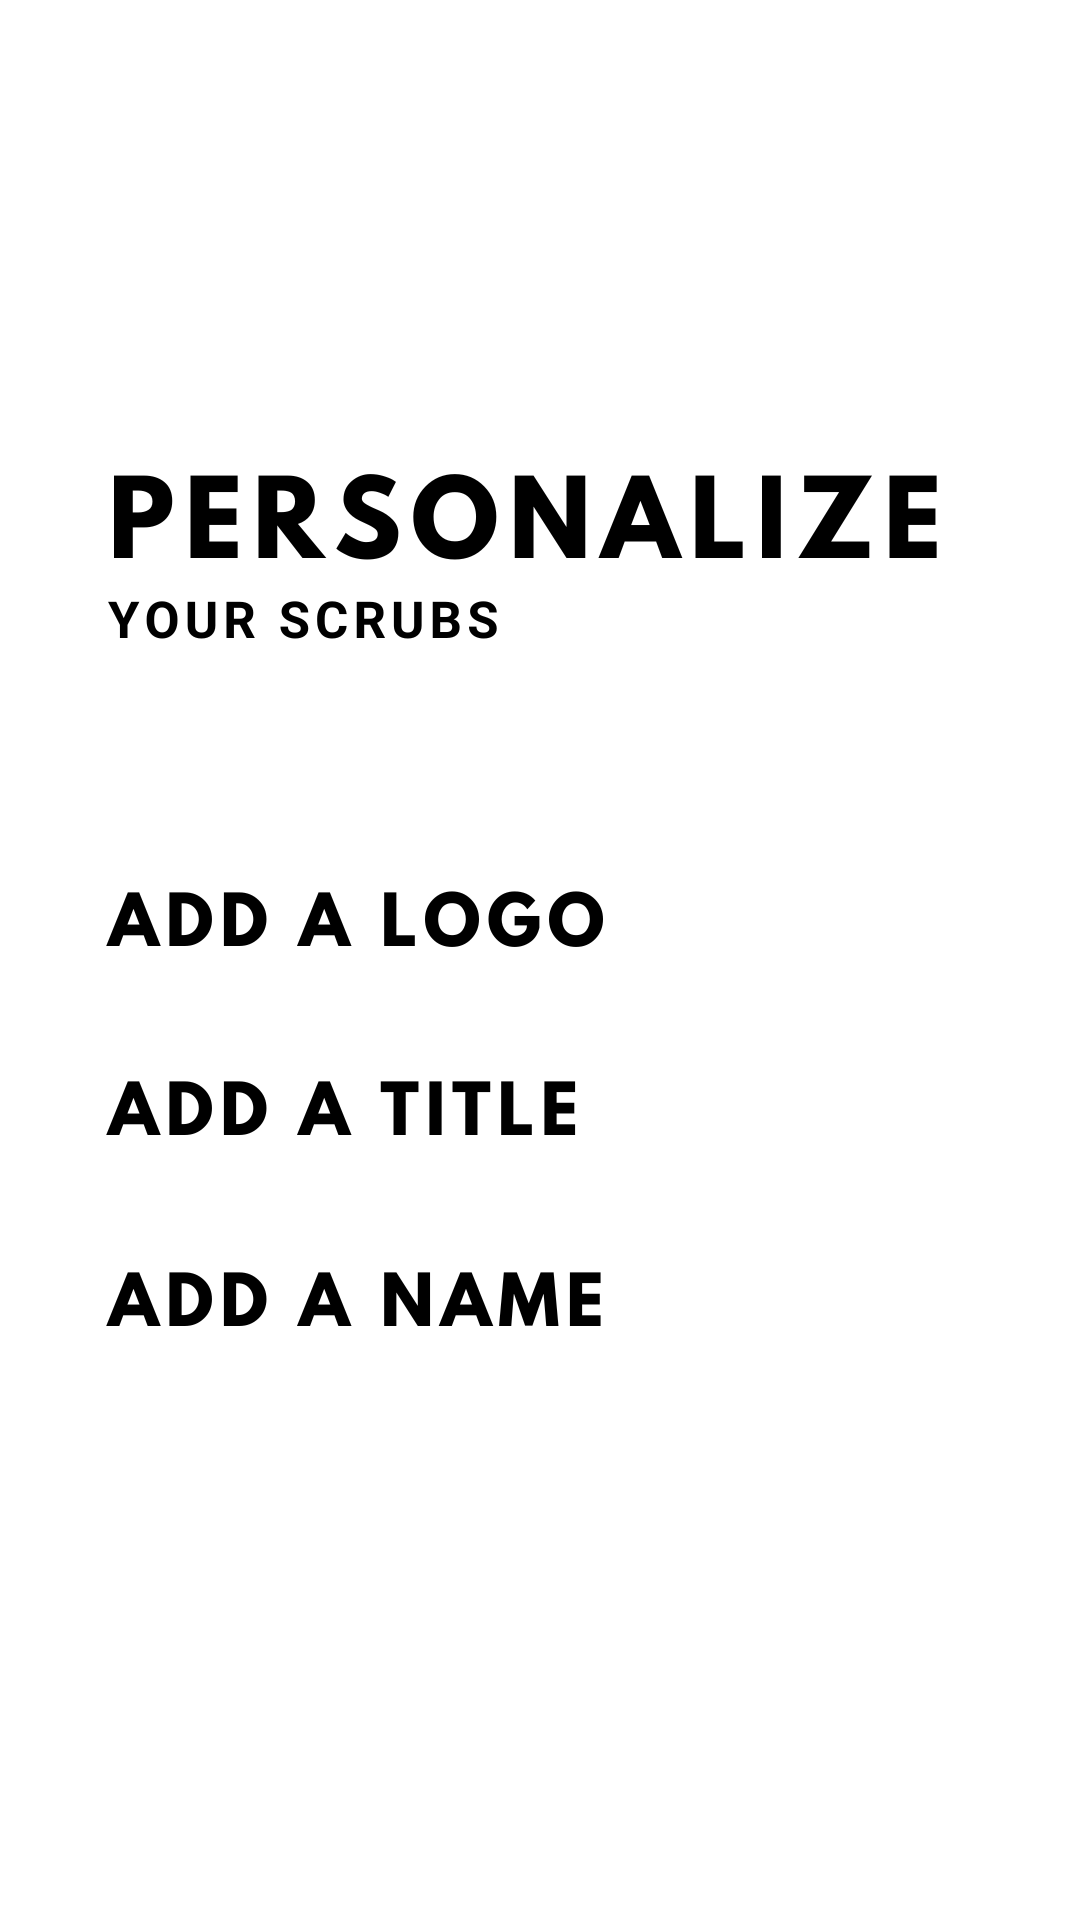 Personalize Your Scrubs